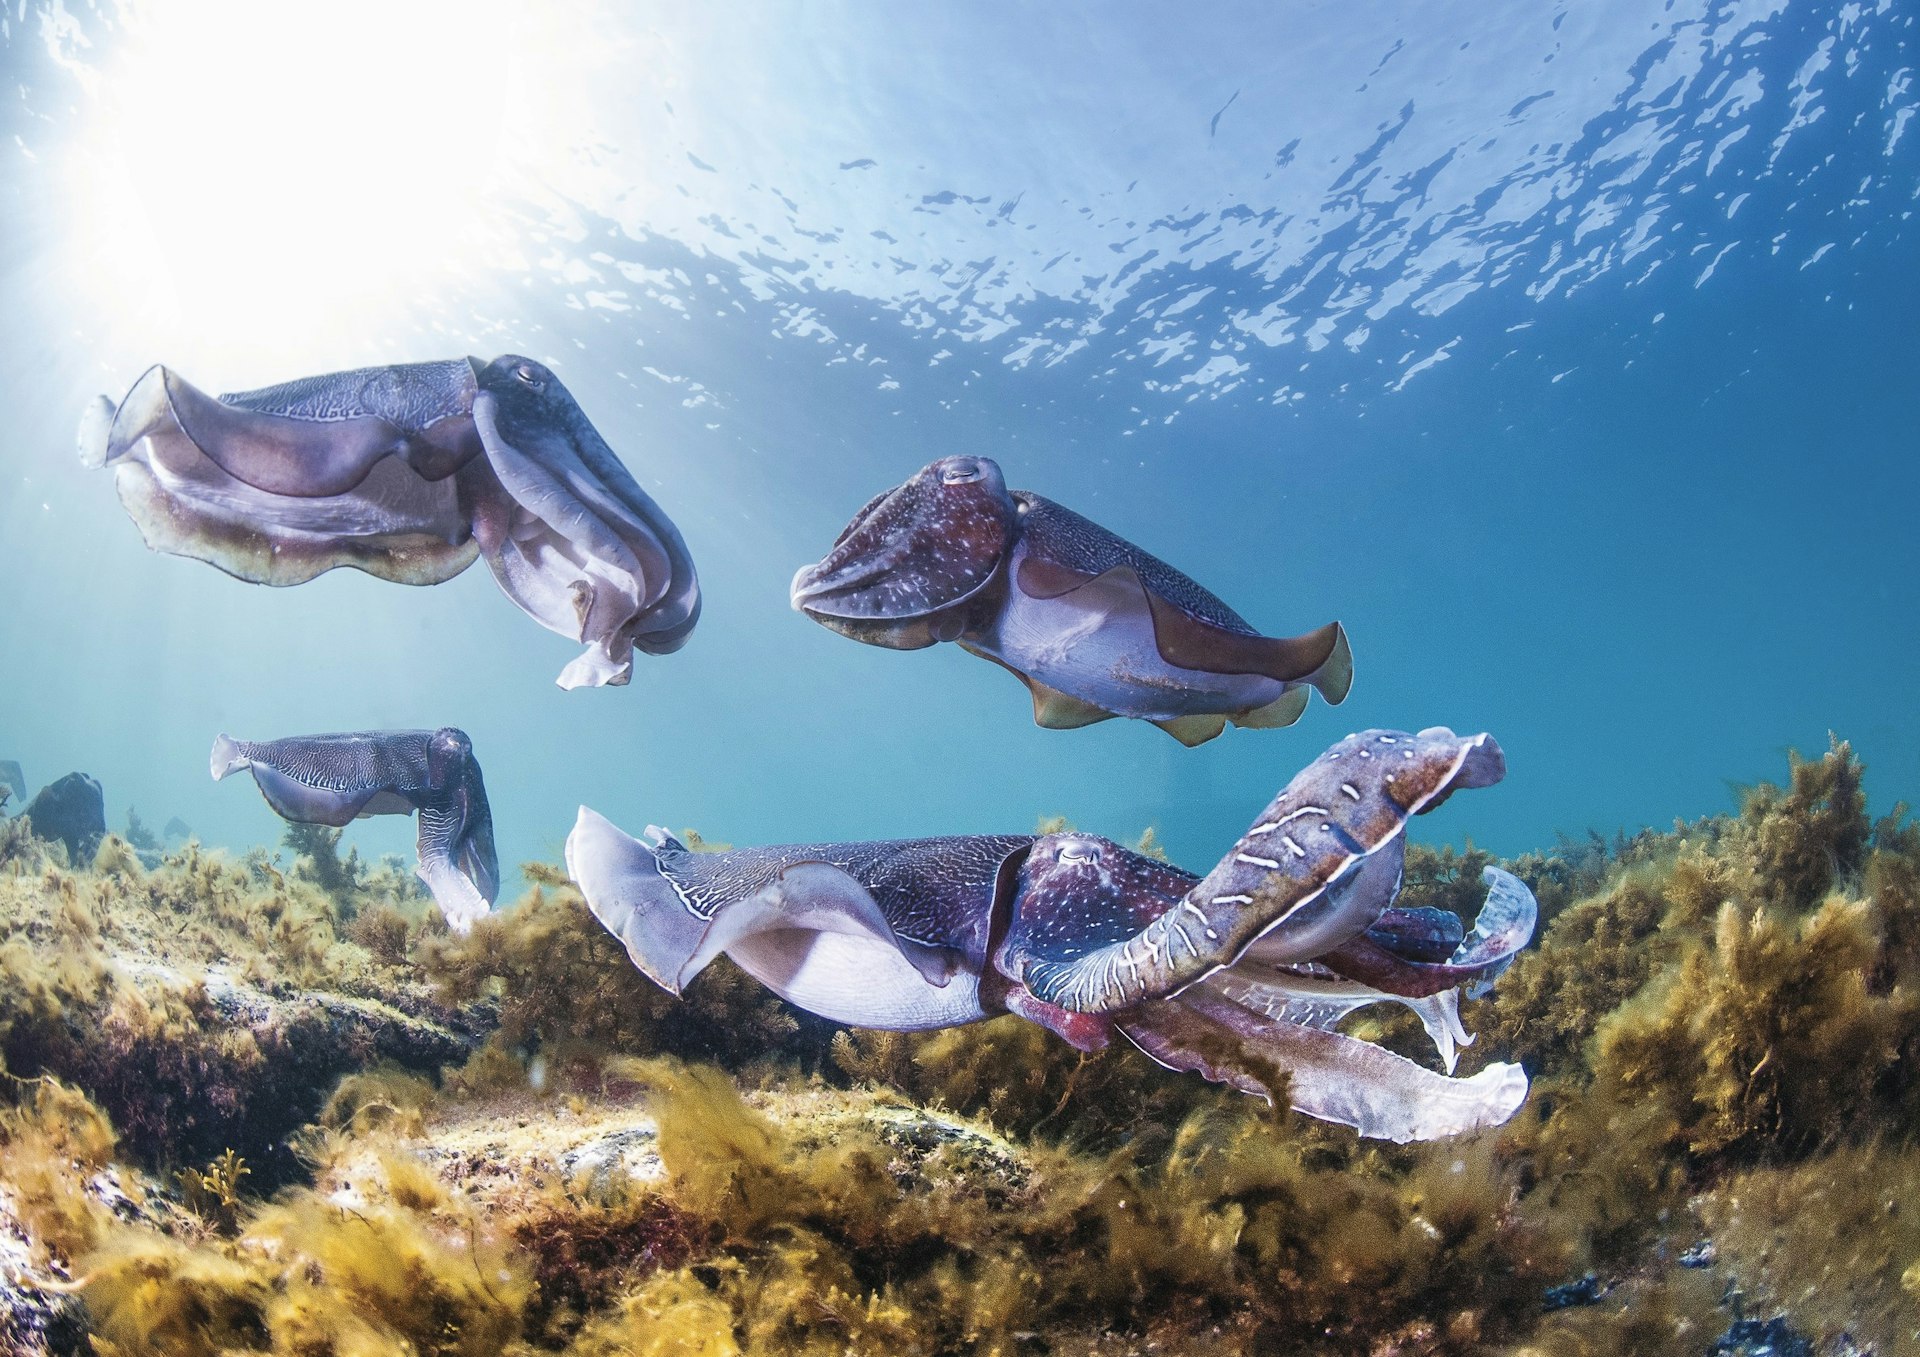 Cuttlefish underwater in South Australia by Carl Charter